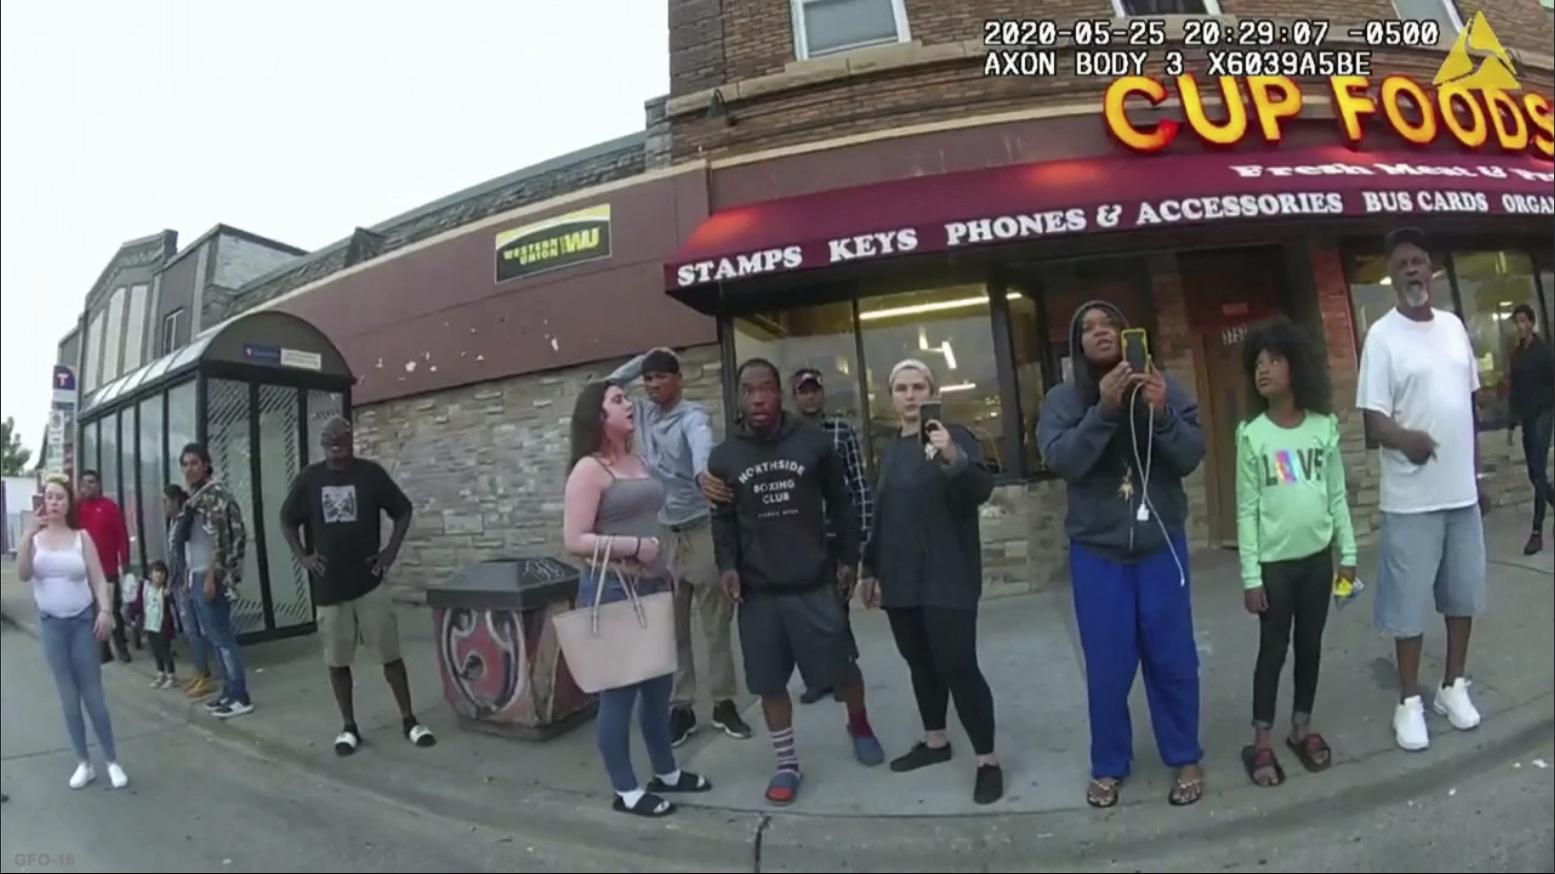 This image from a police body camera shows people gathering as former Minneapolis police officer Derek Chauvin was recorded pressing his knee on George Floyd’s neck for several minutes as onlookers yelled at Chauvin to get off and Floyd saying that he couldn’t breathe on May 25, 2020 in Minneapolis. (Minneapolis Police Department via AP)